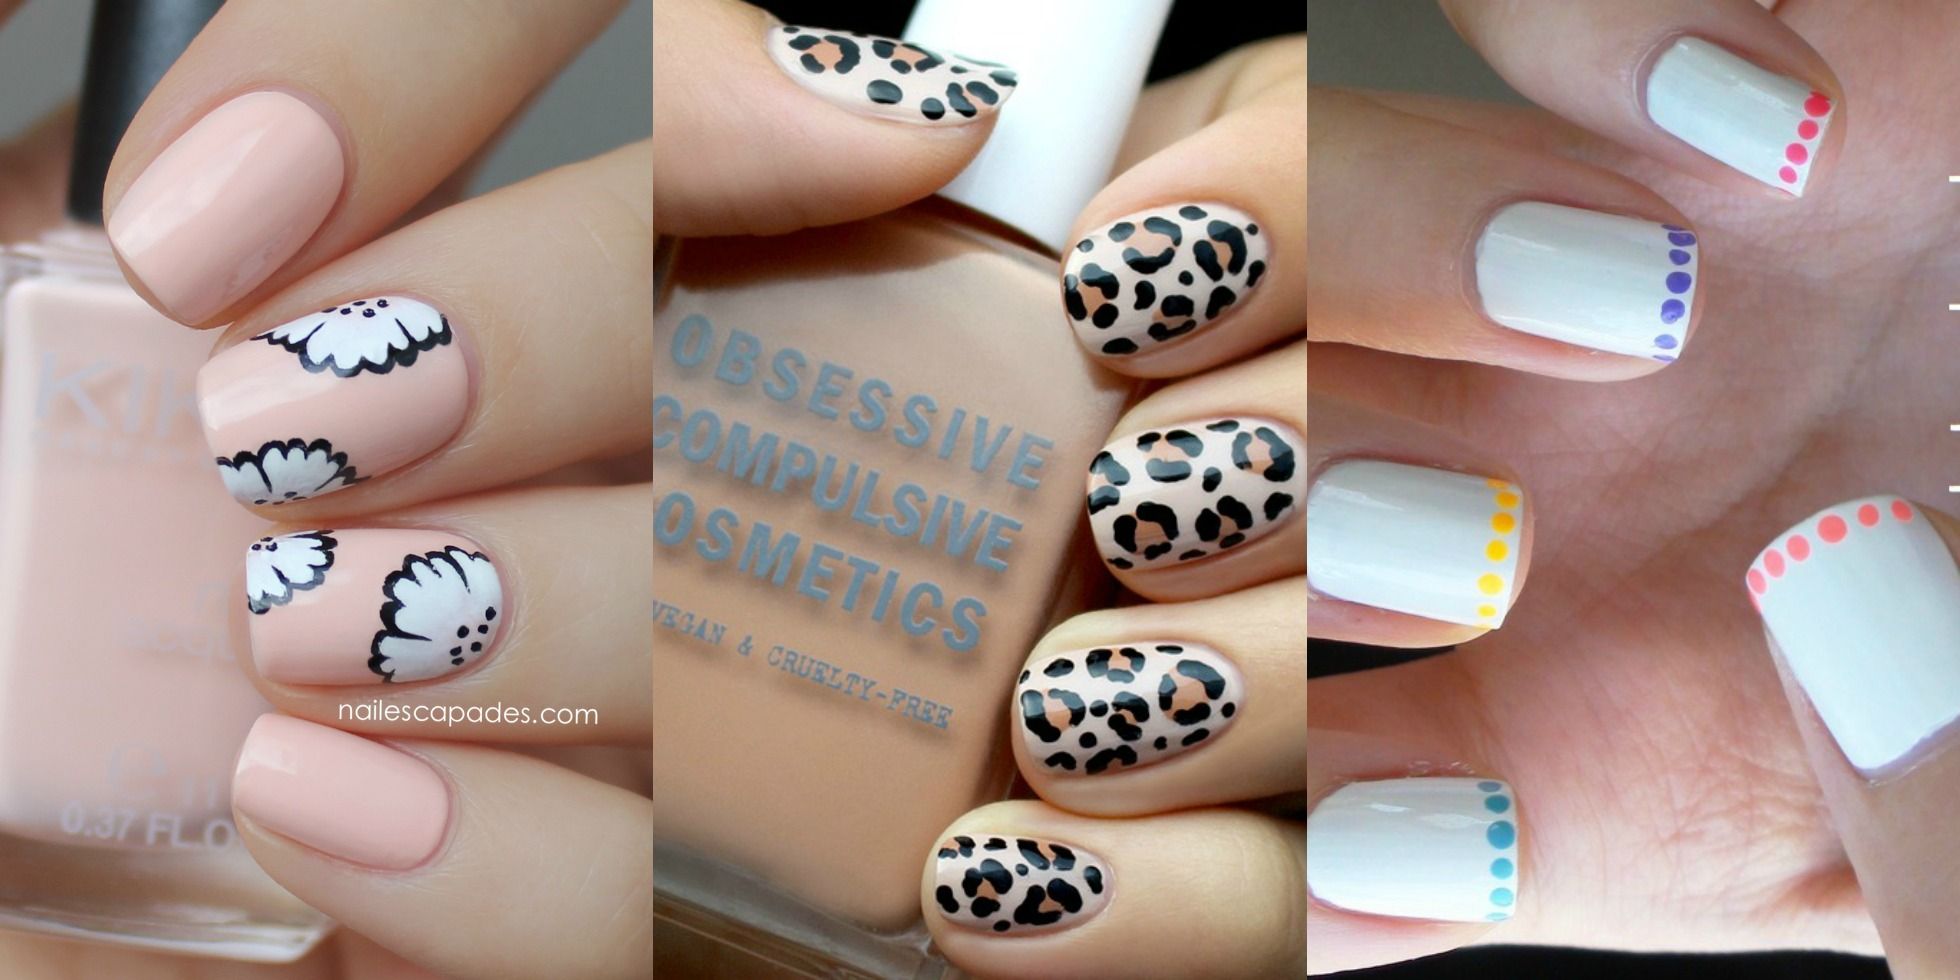 9. Easy and Stylish Short Nail Designs - wide 1